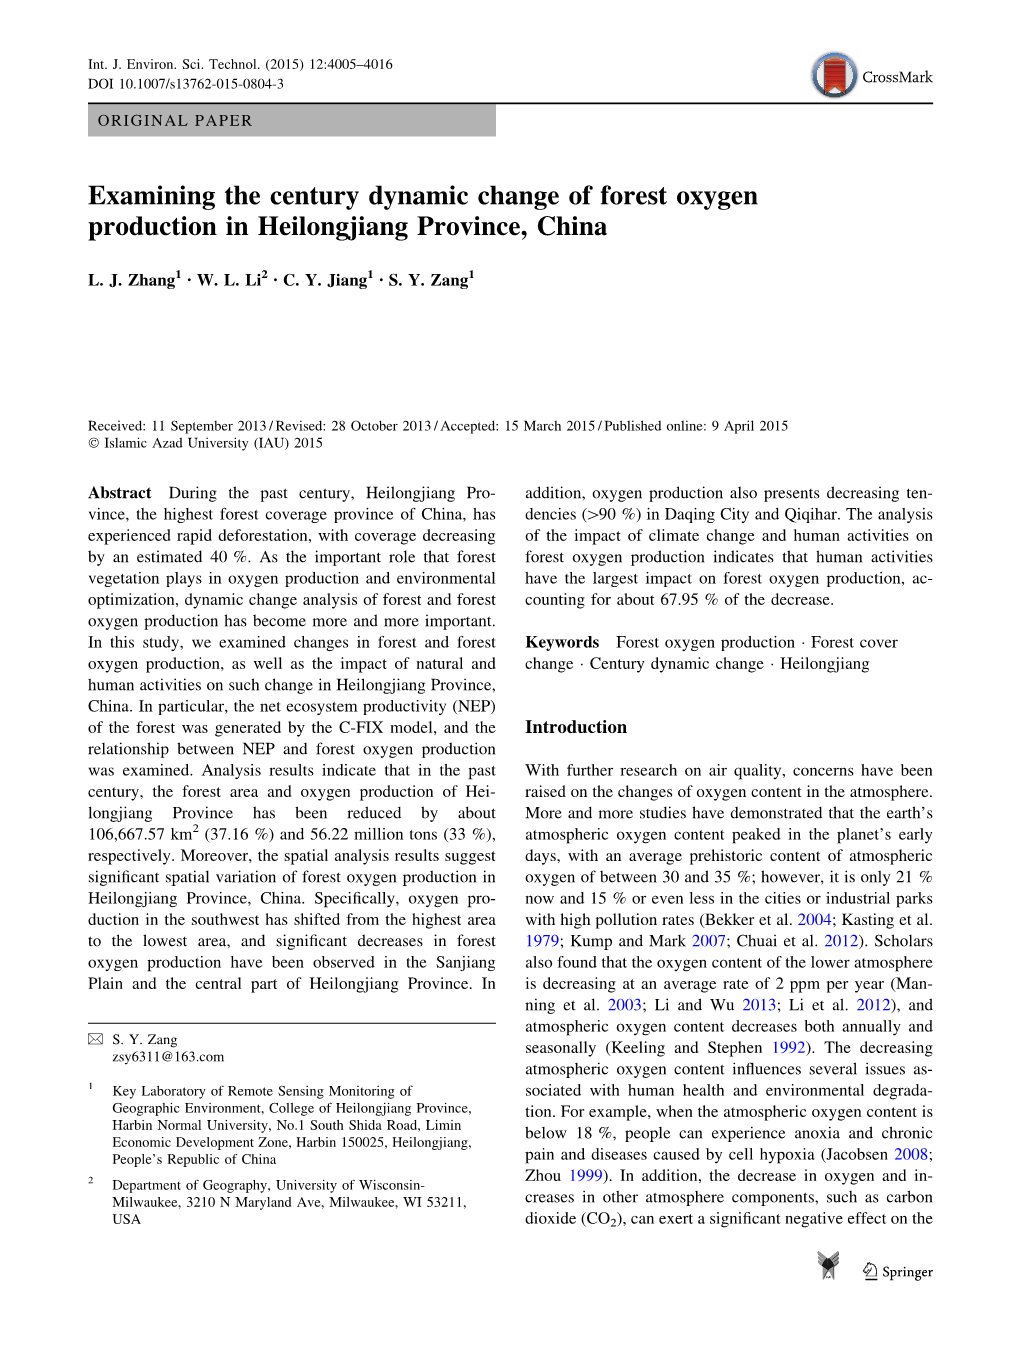 Examining the Century Dynamic Change of Forest Oxygen Production in Heilongjiang Province, China